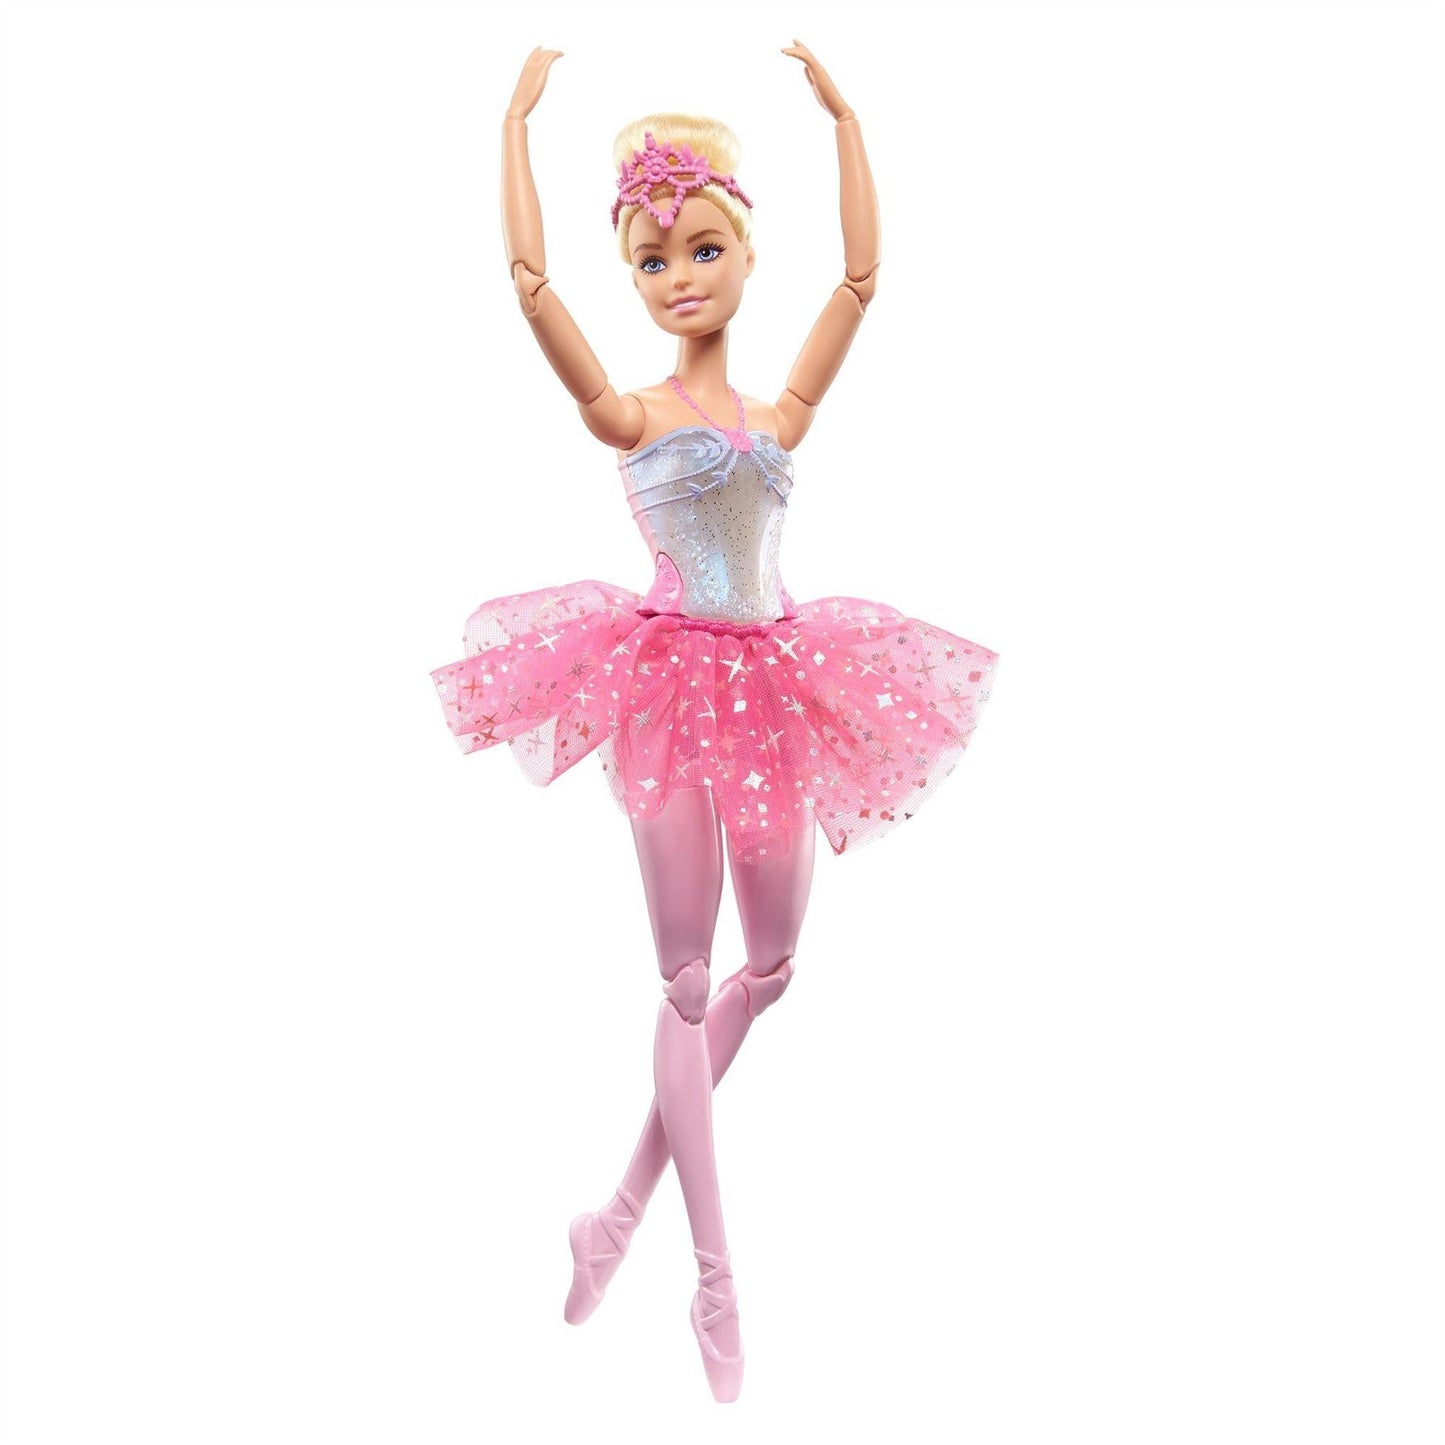 Barbie Twinkle Lights Feature Ballerina Doll - 29cm, Barbie Doll, Magical Ballerina Doll | Blonde Hair, Light-Up Feature, Tiara and Pink Tutu, Ballet Dancing, Poseable, Kids Toys, official licensed barbie toy, barbie's iconic home, make your own, barbie doll, spencer doll, Chelsea doll, barbie, skipper, barbie beach, barbie beach house, barbie beach house, barbie beach bungalow, barbie beach doll, barbie beach house with pool, barbie beach cruiser, mega bloks barbie beach house, barbie beach towel, barbie b